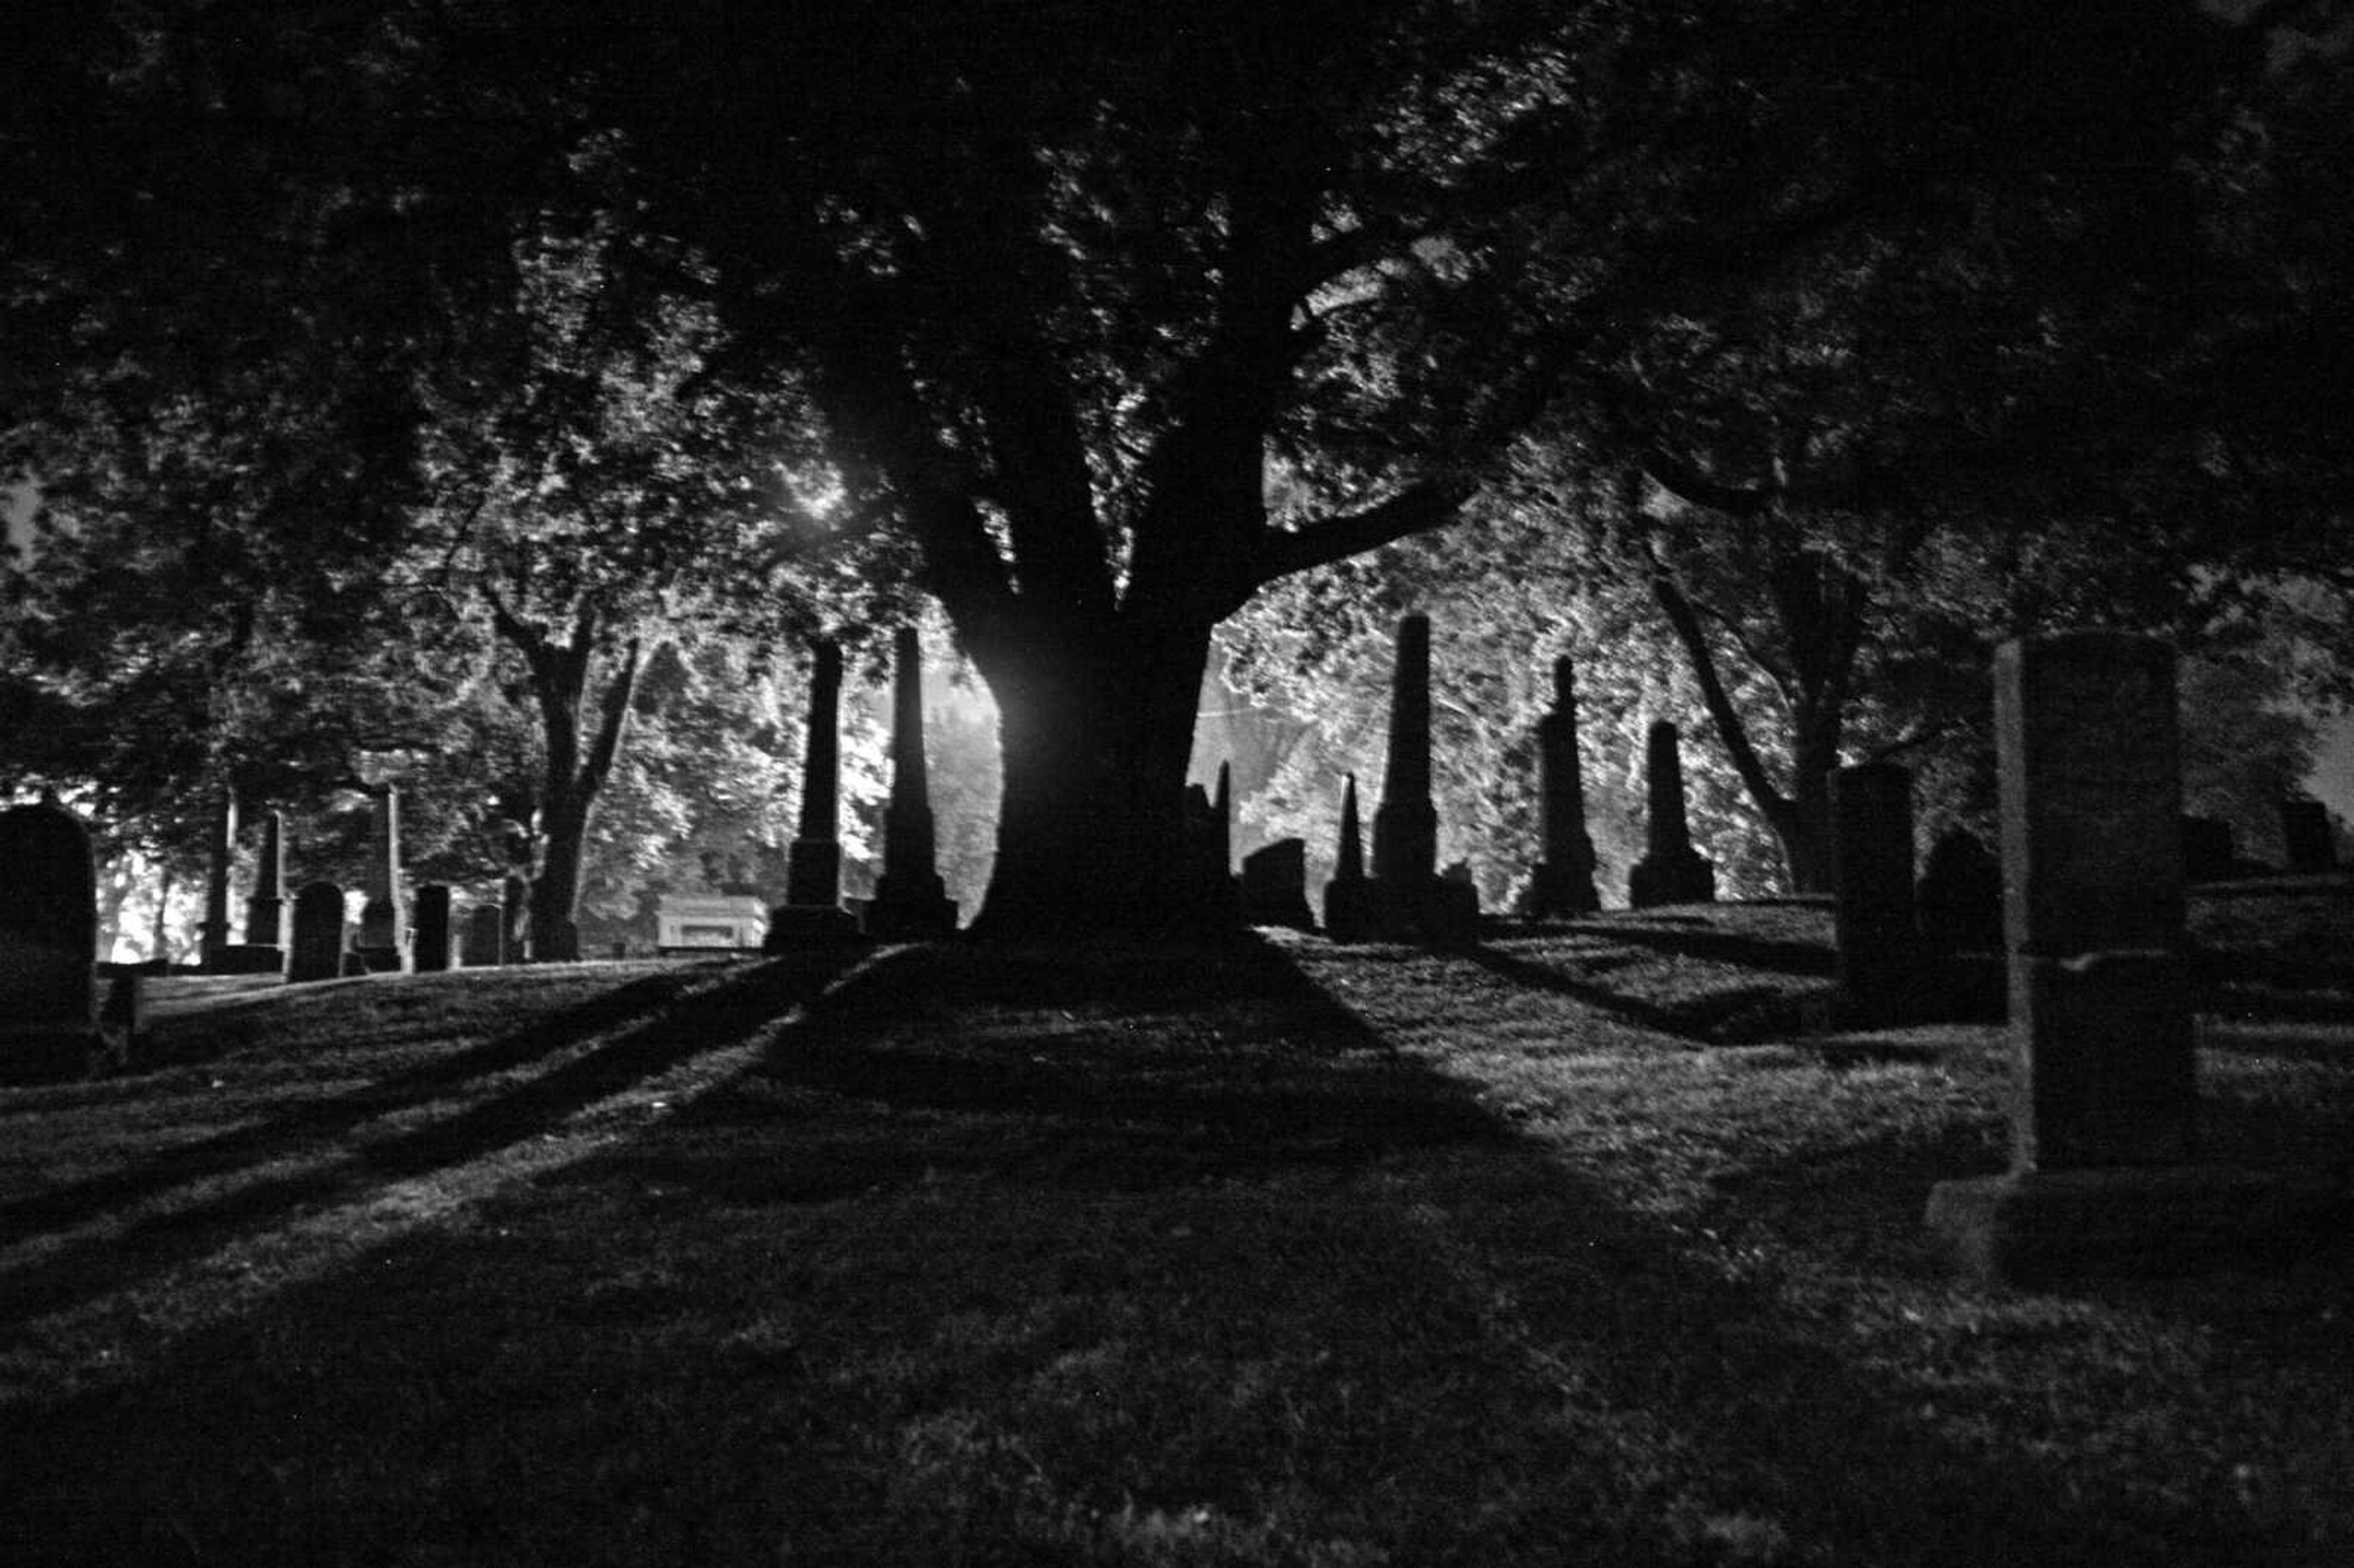 Old Lorimier Cemetary in Cape Girardeau is said to be haunted. - Submitted photo